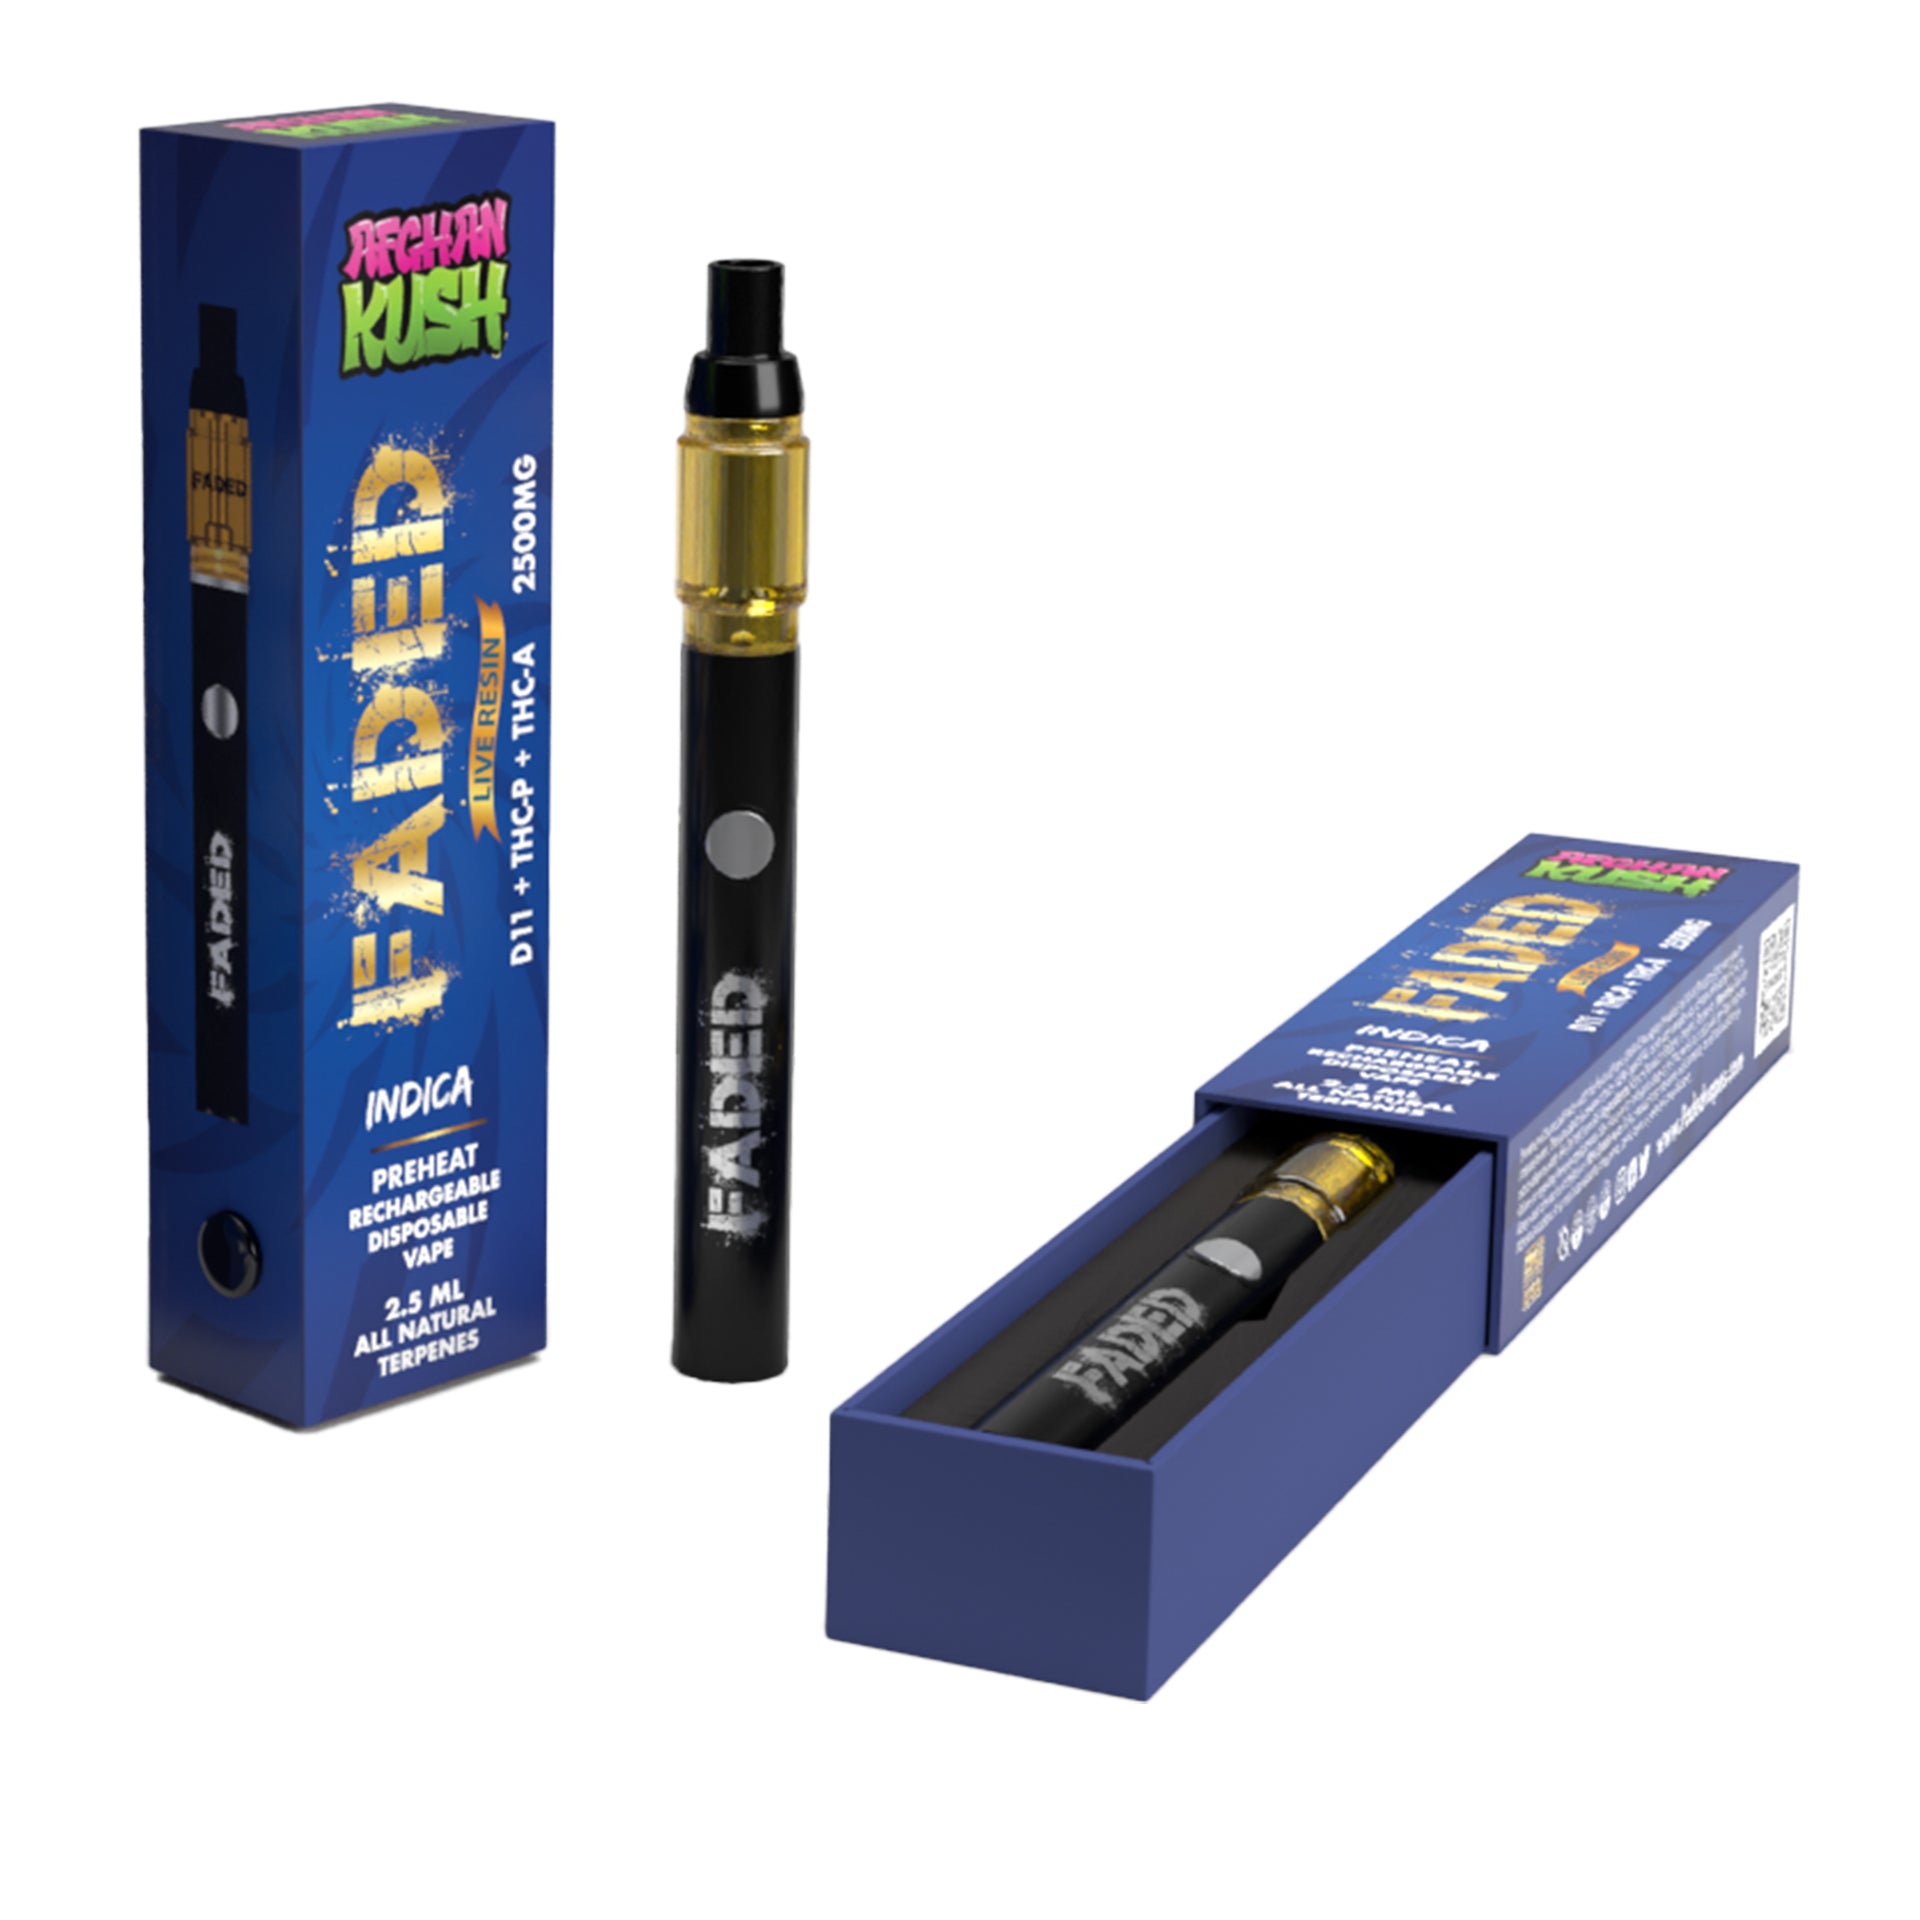 faded delta-11+thc-p+thc-a rechargeable disposable - indica afghan kush  2.5ml